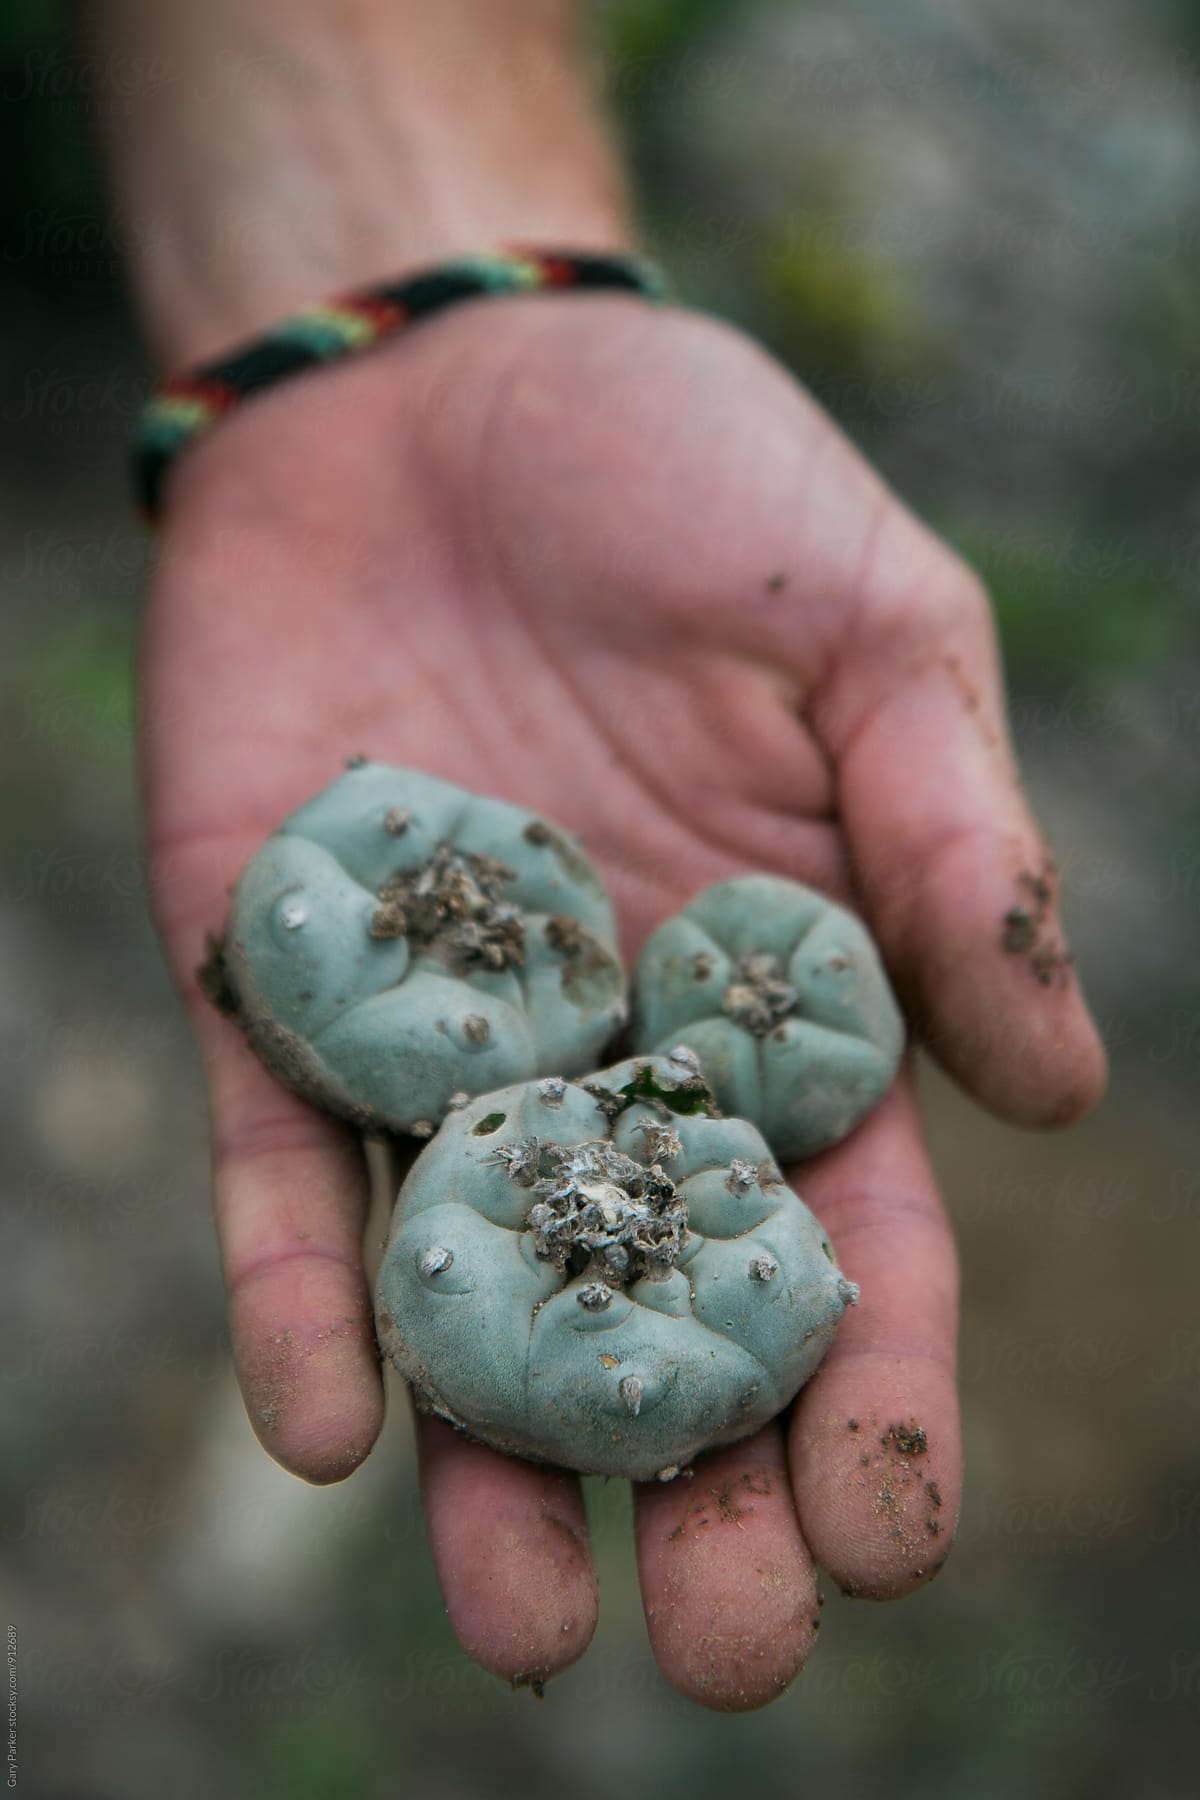  source: https://www.stocksy.com/912689/peyote-cactus-buttons-sitting-on-a-log 